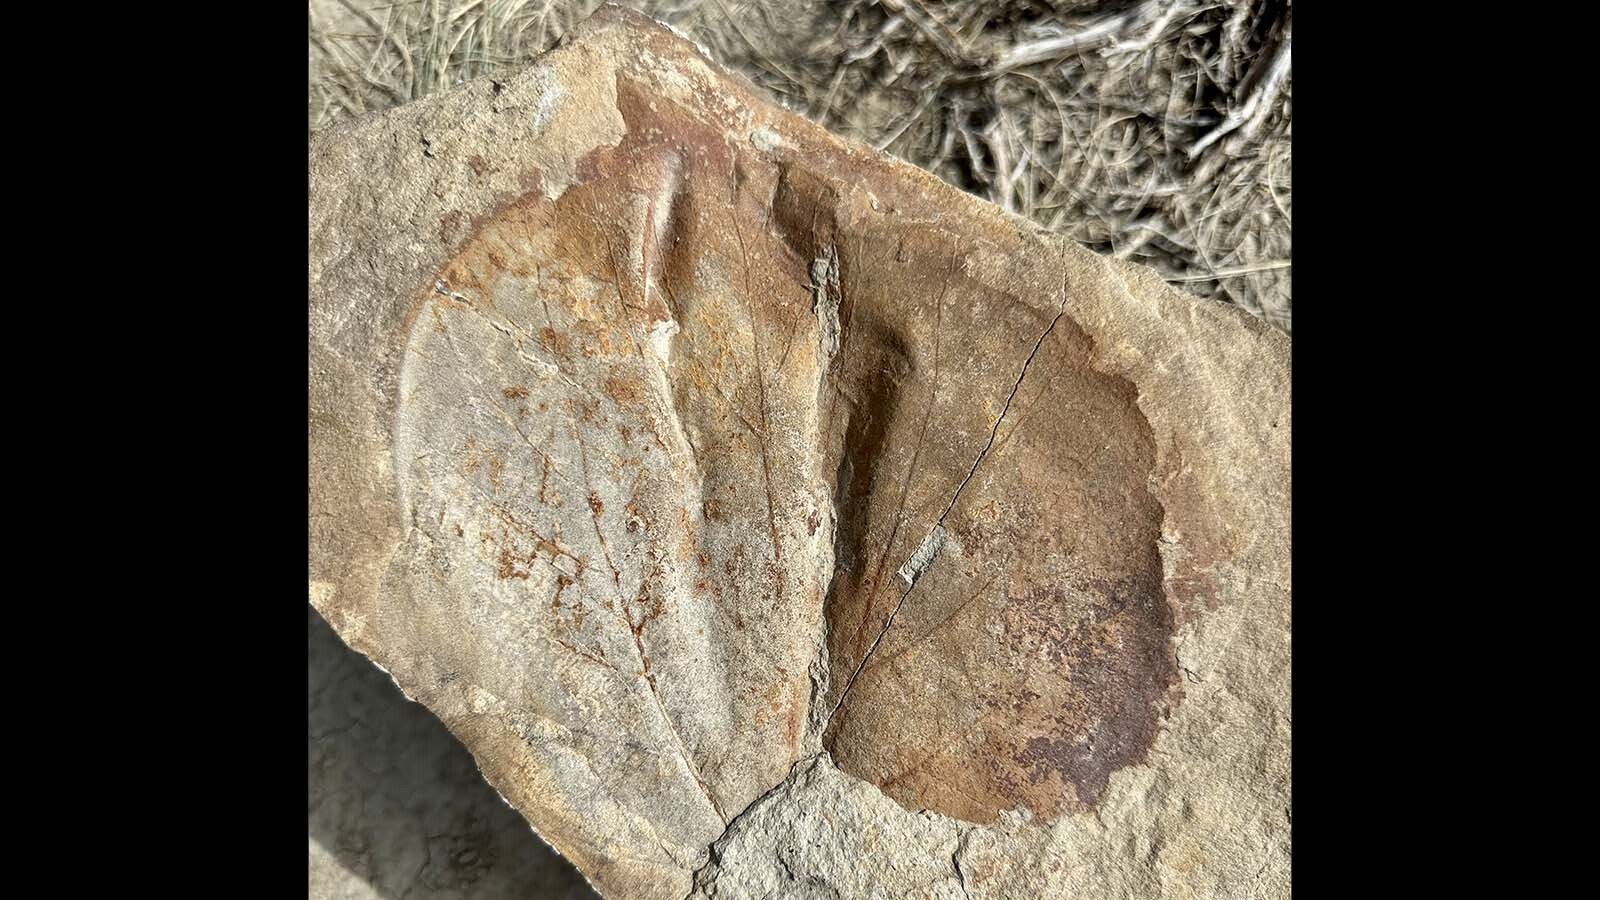 A plant impression from Triceratops Gulch. This has been tentatively identified as a lily pad, a fossilized reminder that Wyoming was much warmer and wetter at the end of the Late Cretaceous Period.